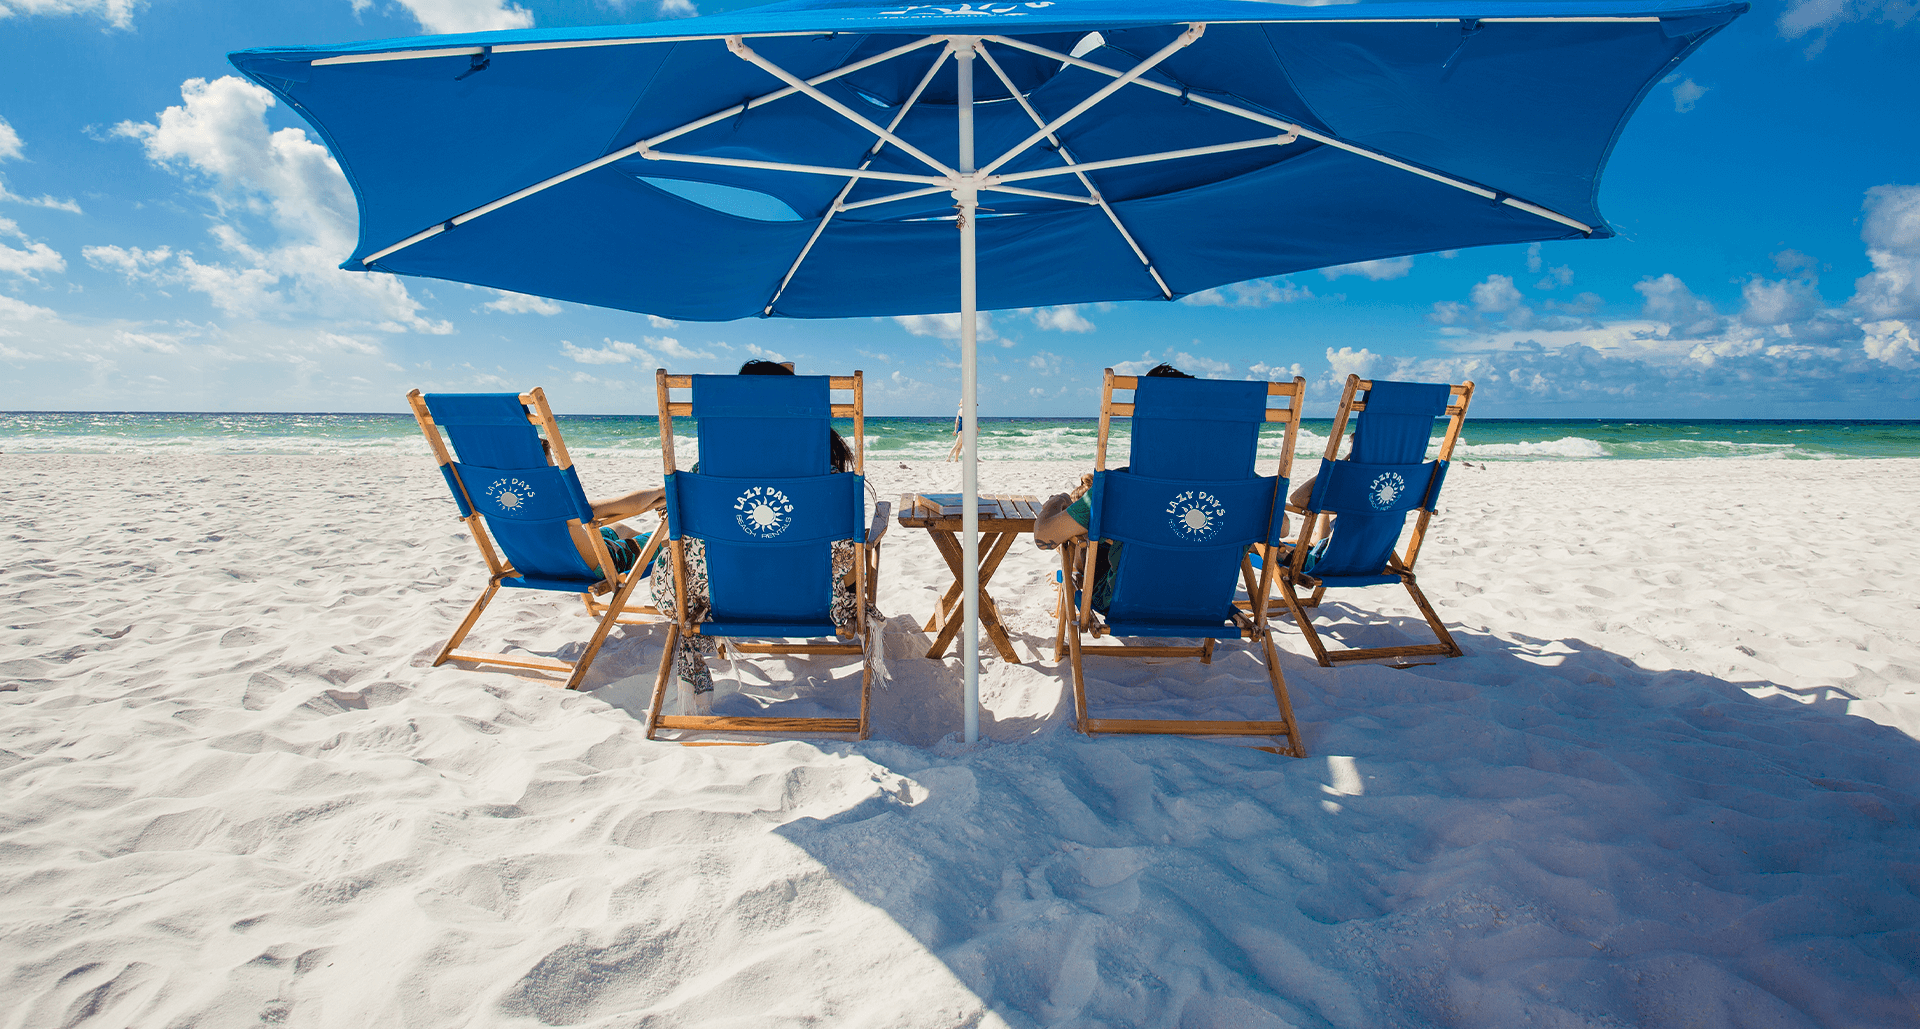 FAQs about renting beach chairs and umbrellas